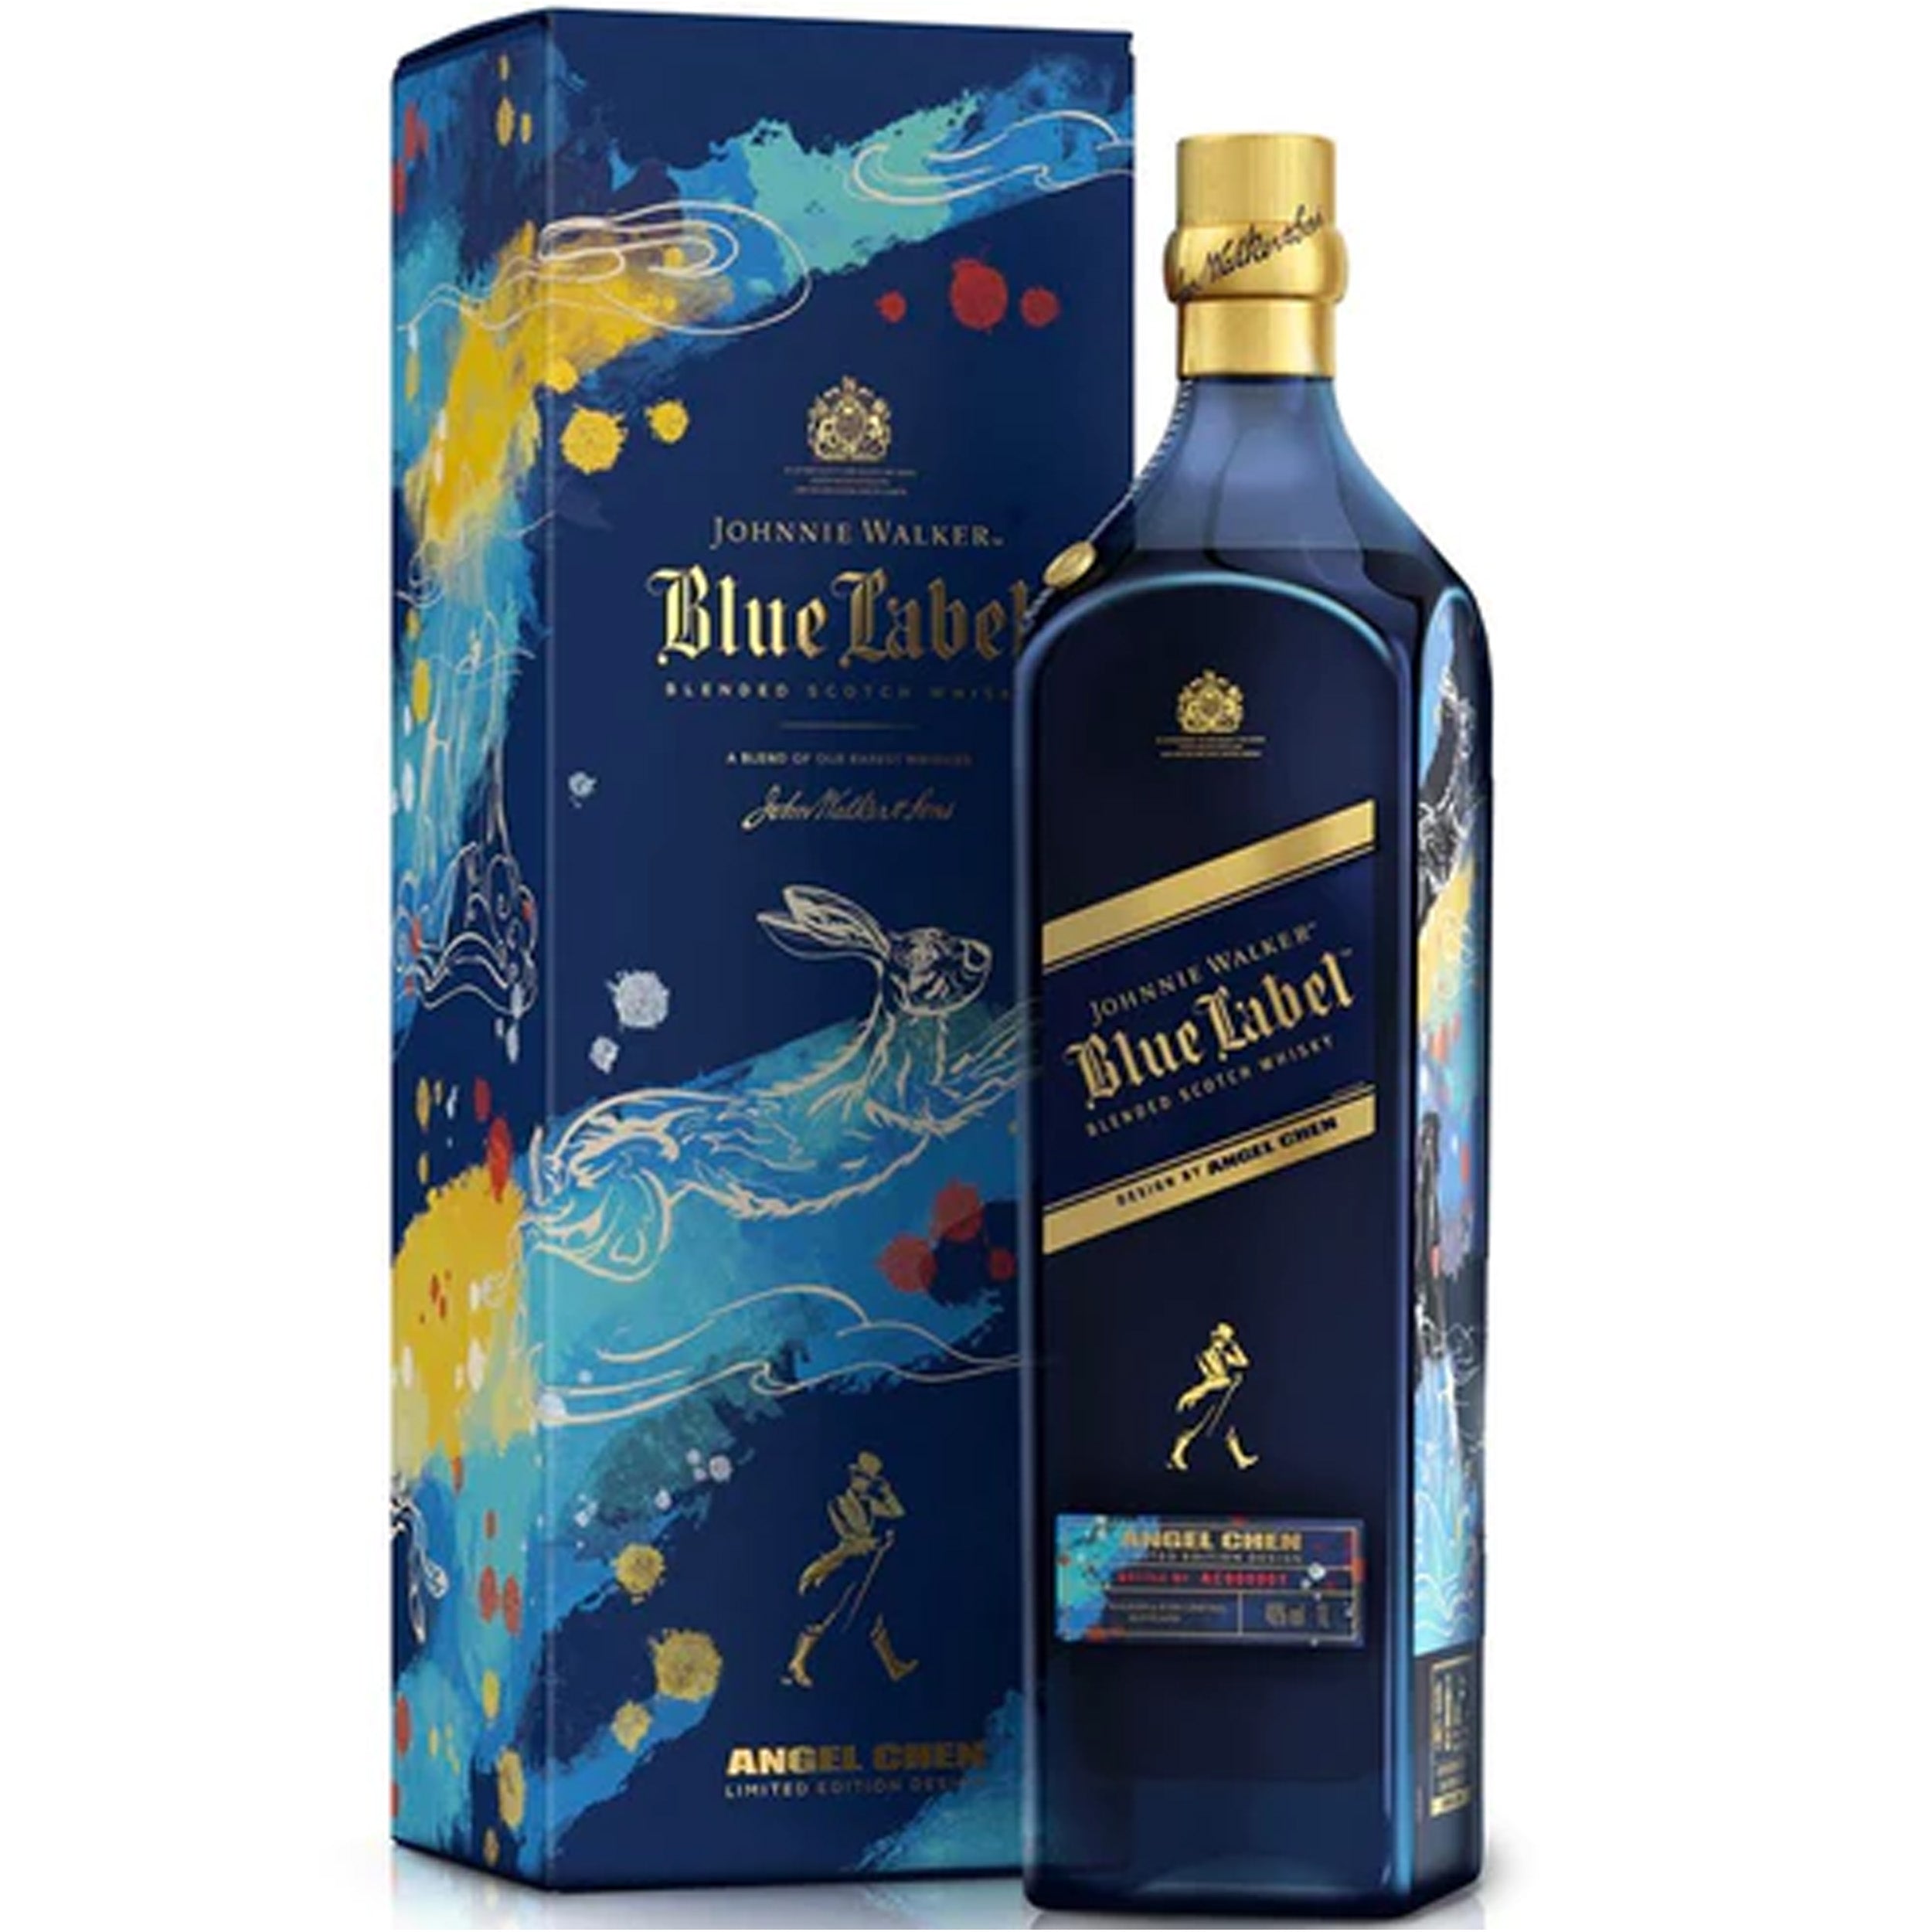 Johnnie Walker Blue Label Year of the Rabbit Limited Edition by Angel Chen